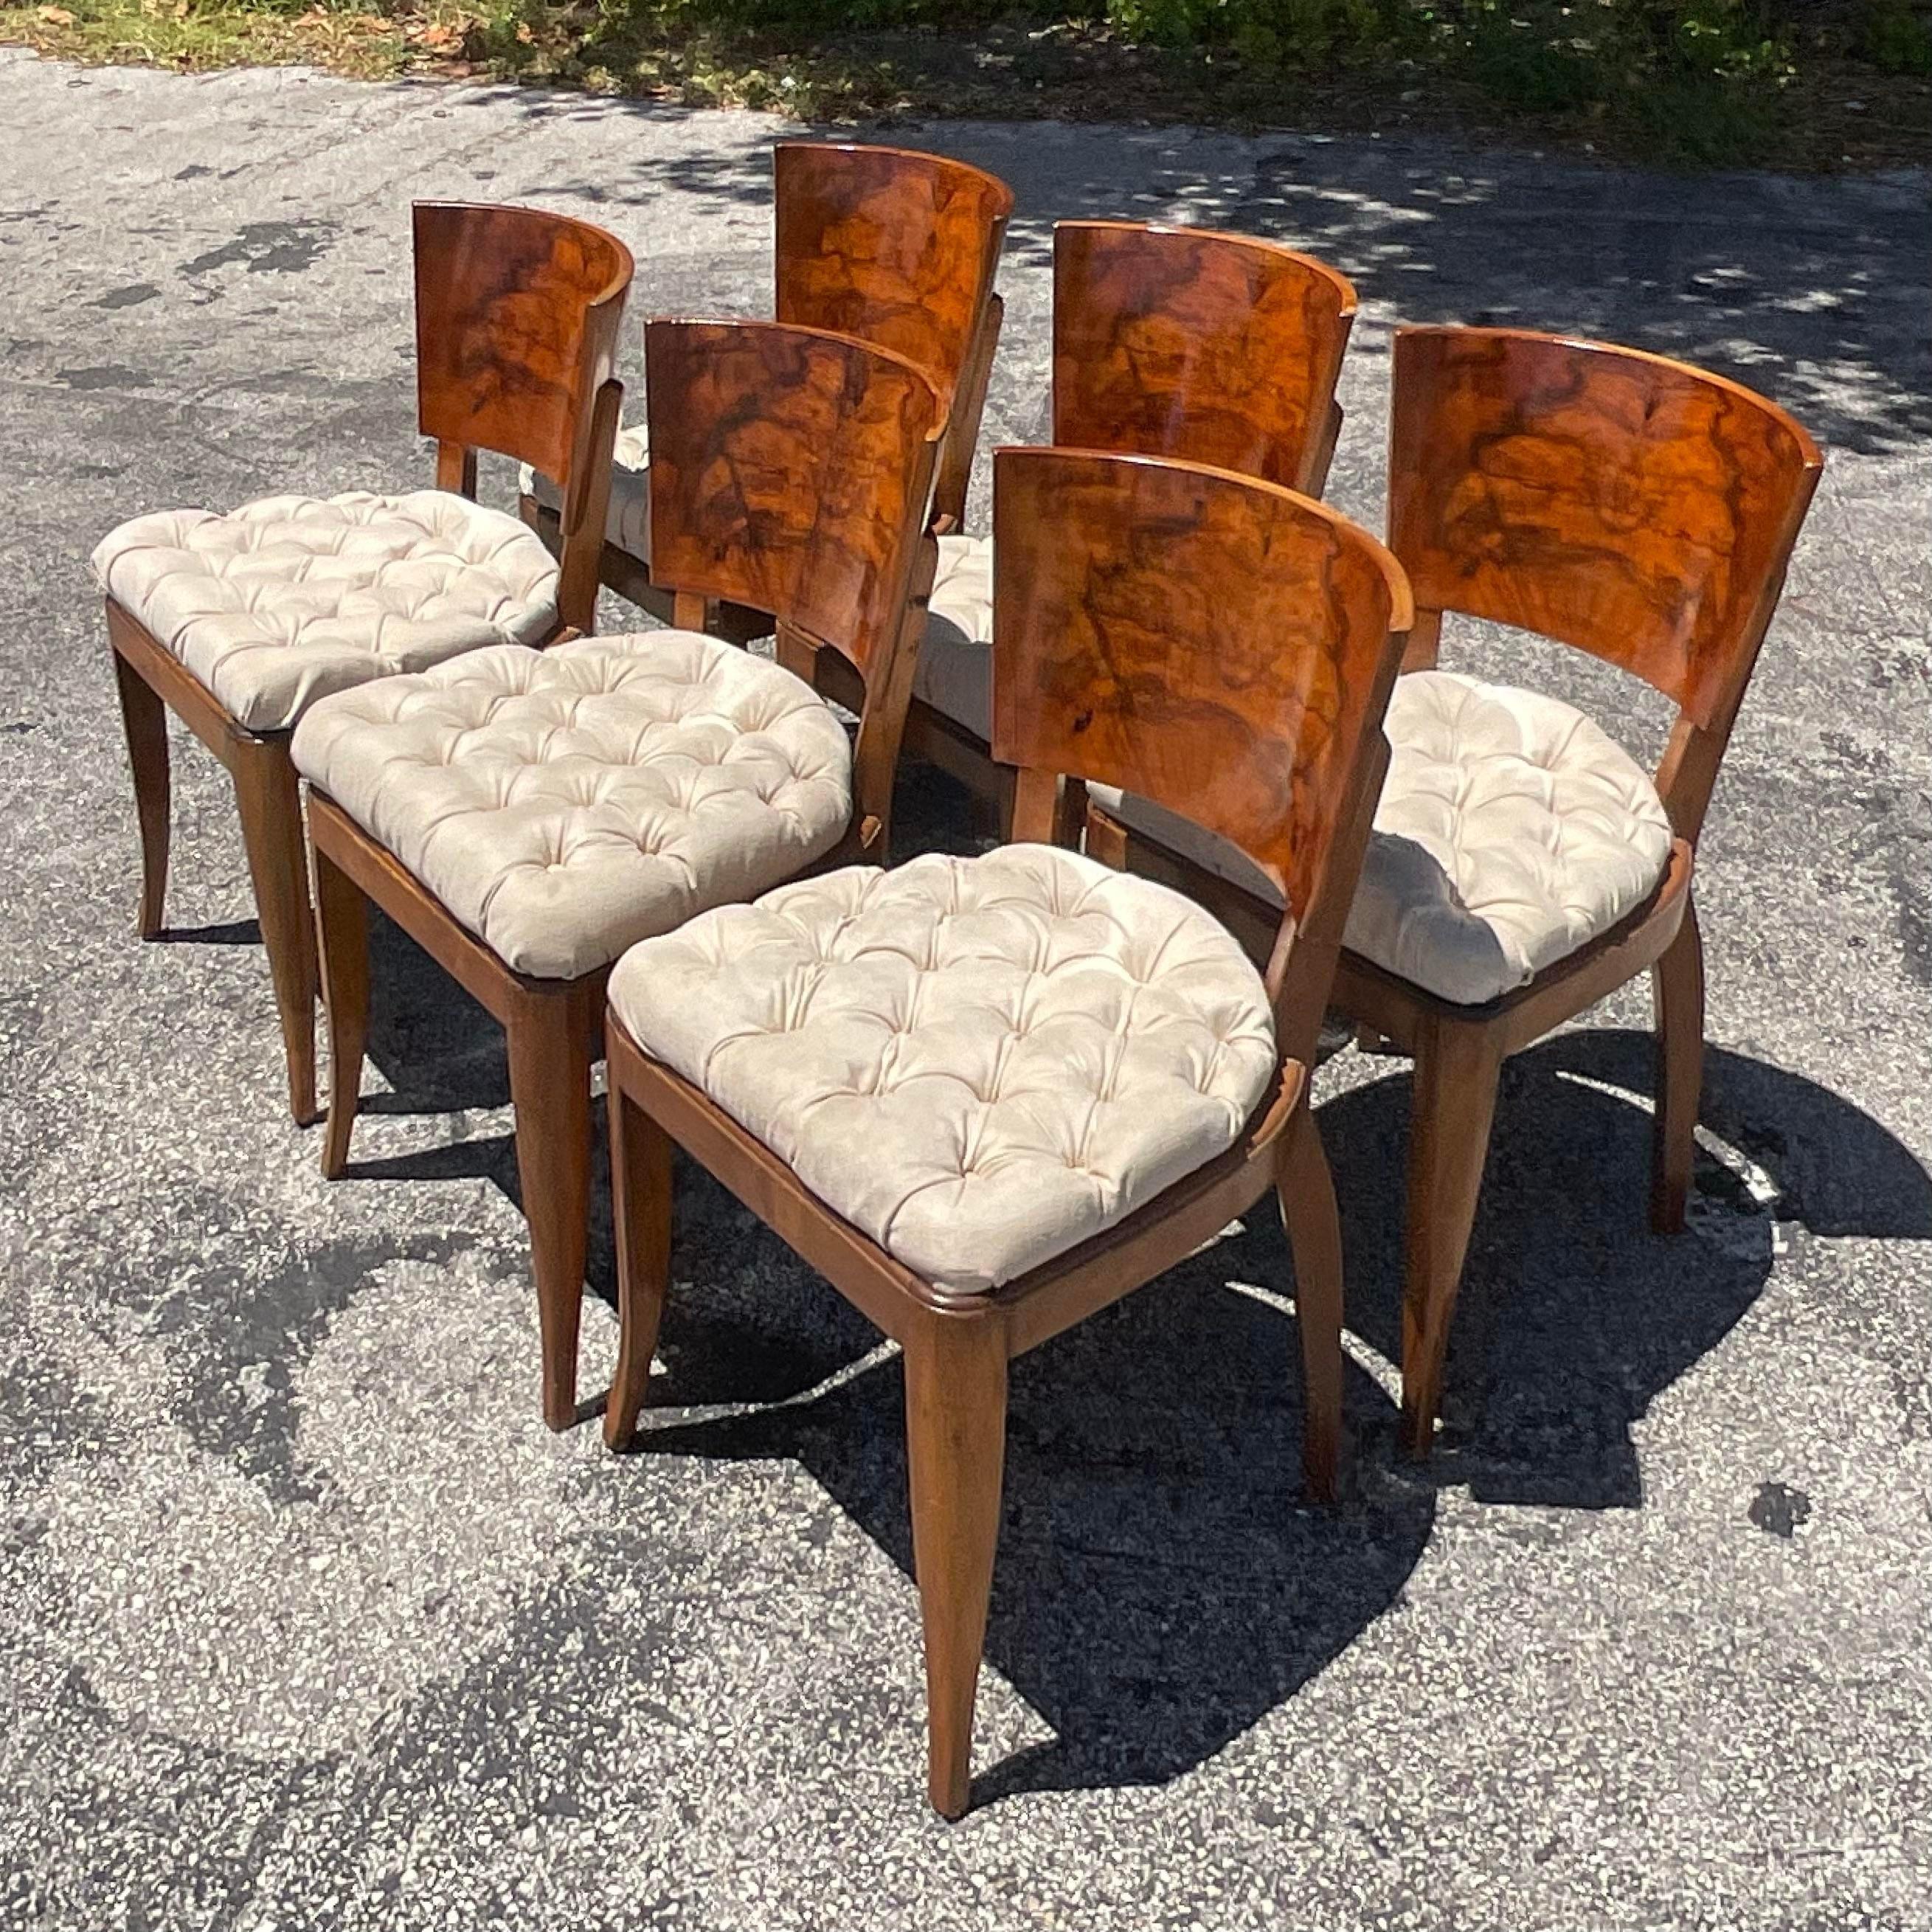 20th Century Vintage Deco Burl Wood Dining Chairs - Set of 6